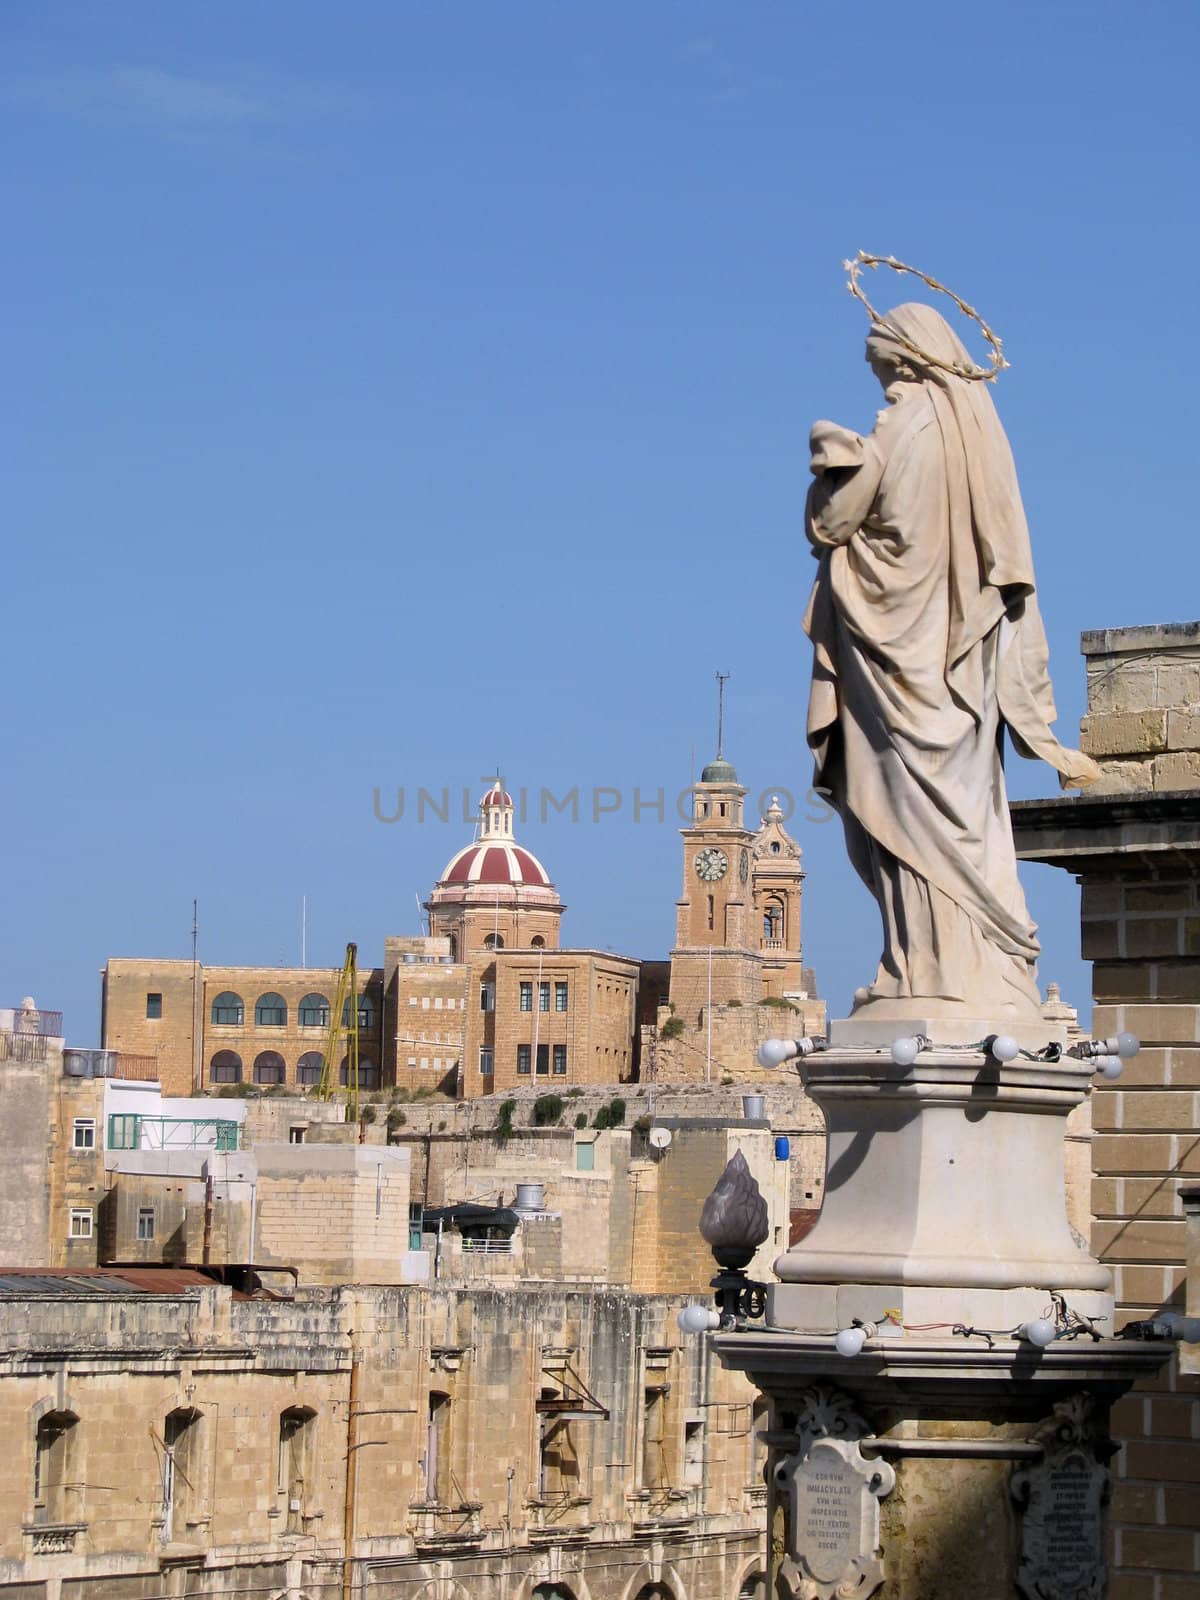 A marble statue of The Immaculate Conception in Cospicua - Malta with the church of Senglea in the background.